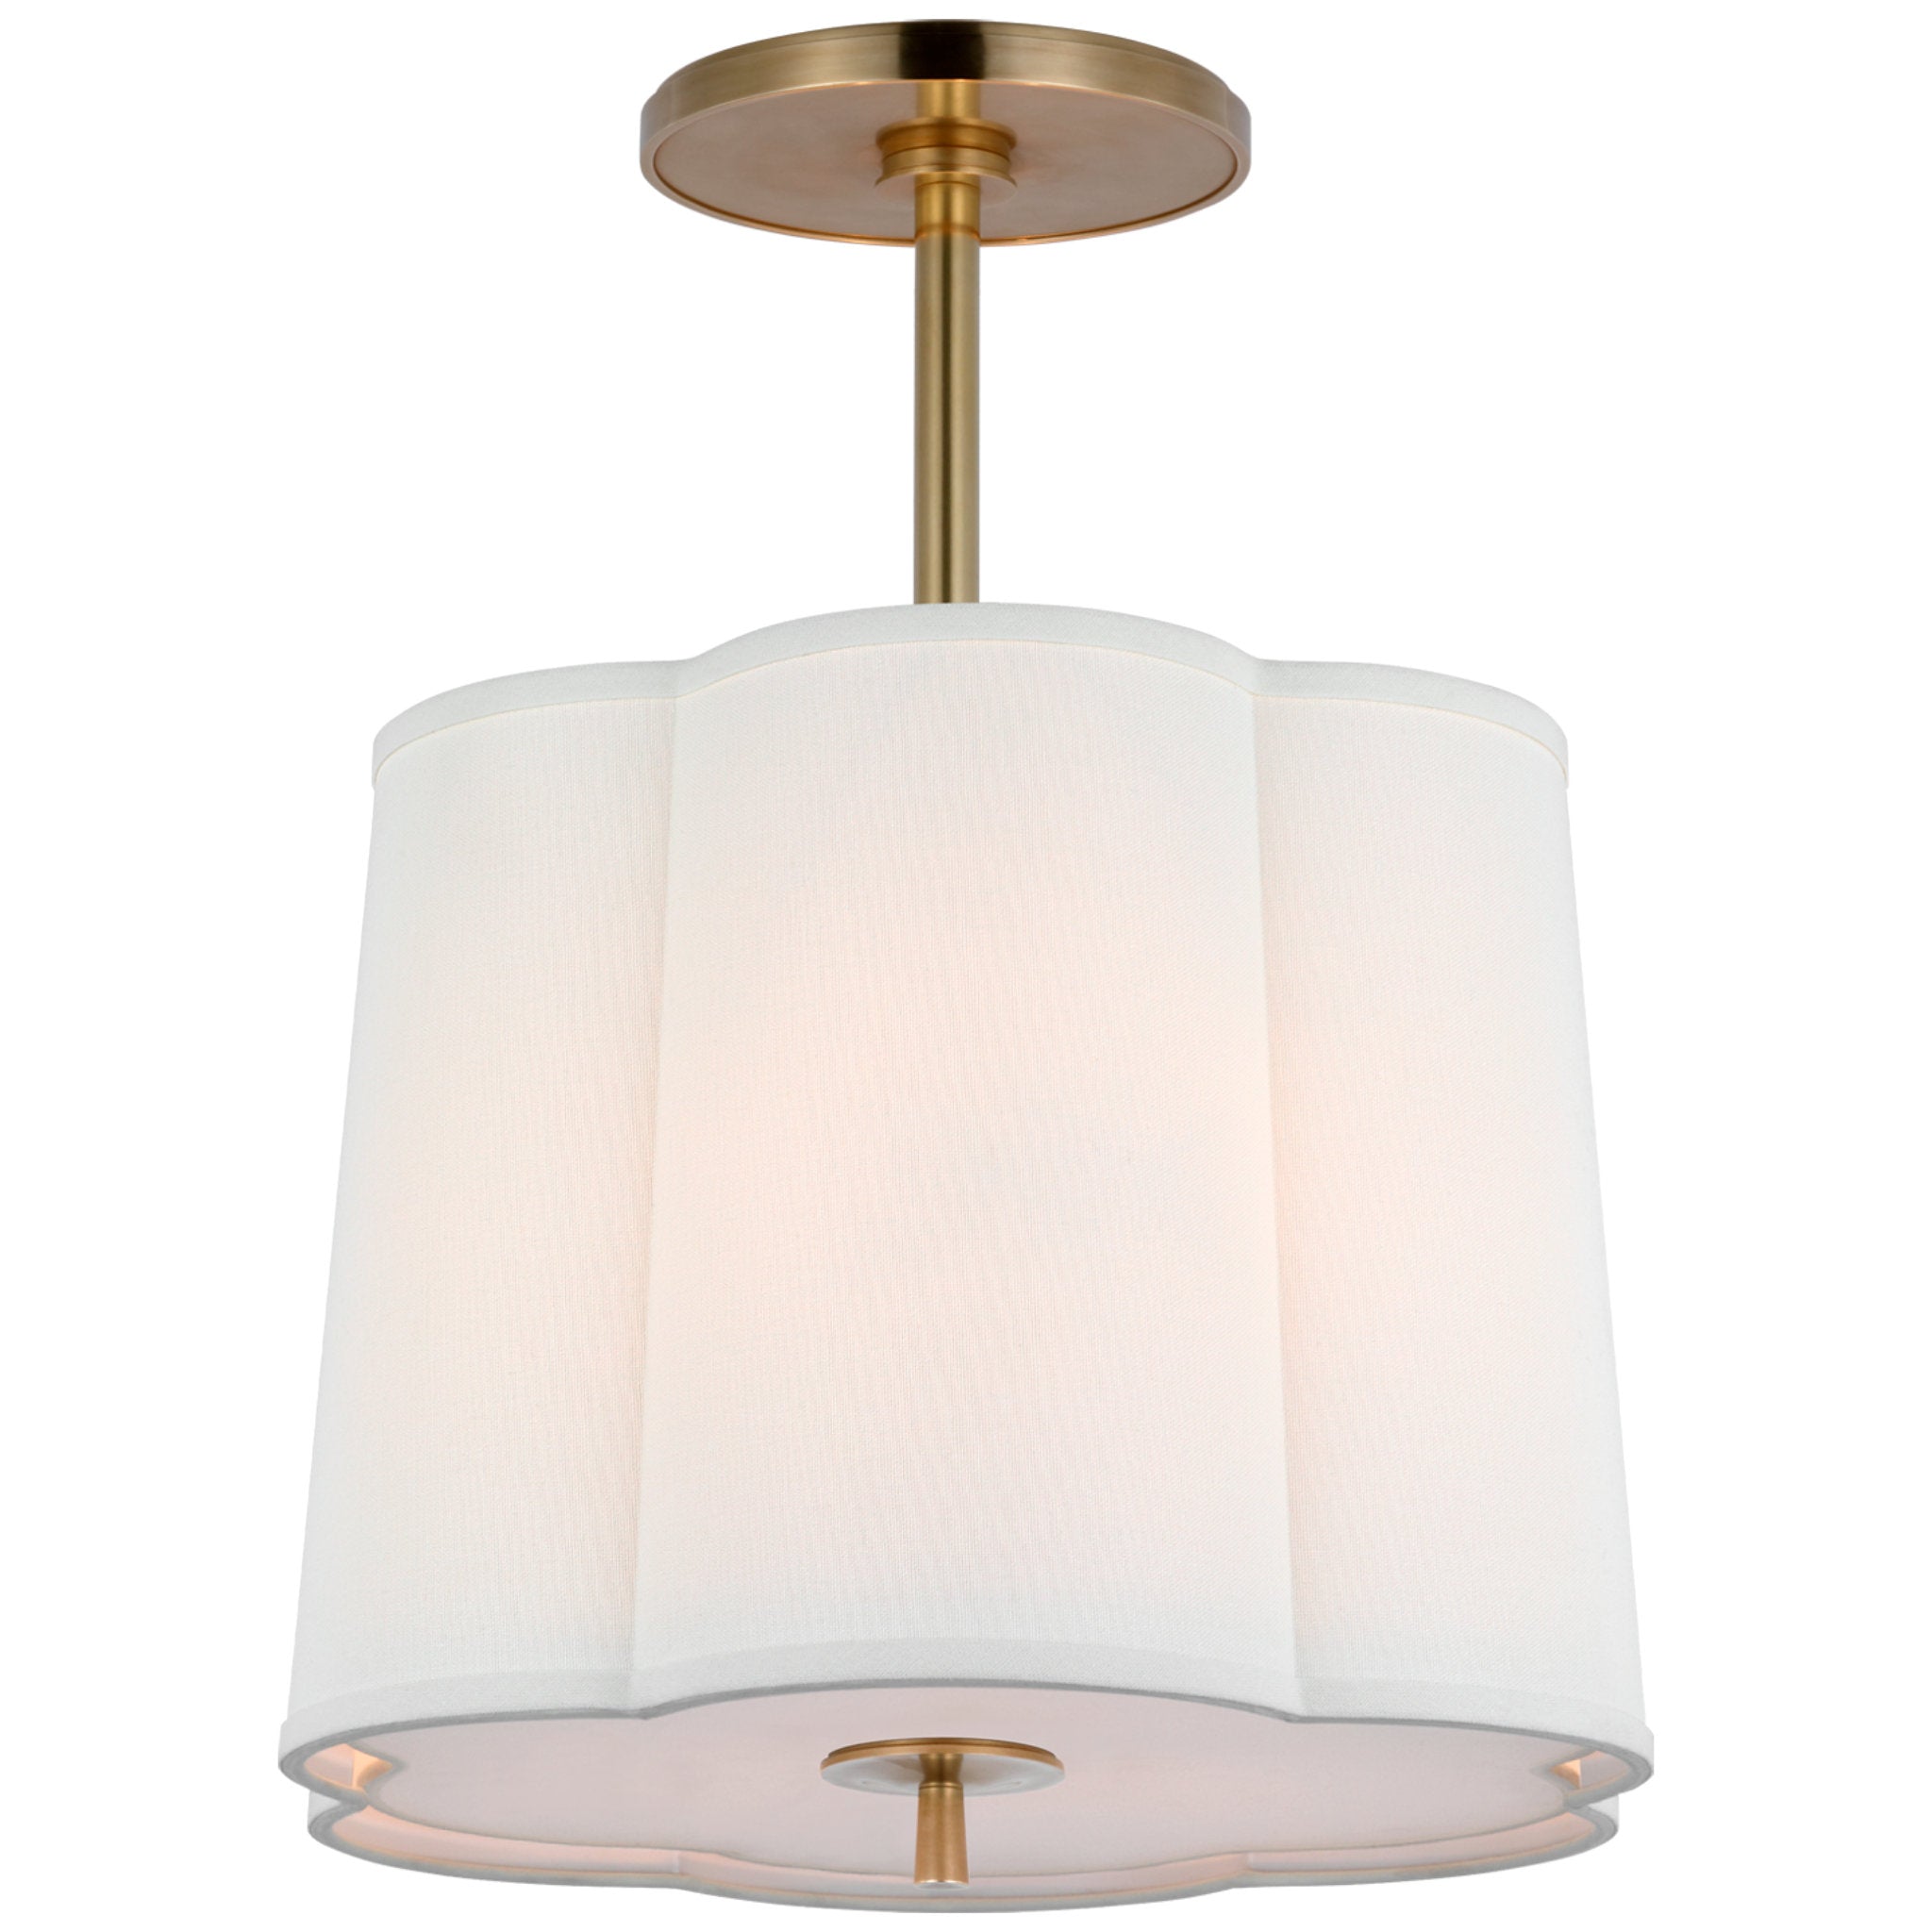 Barbara Barry Simple Scallop Hanging Shade in Soft Brass with Linen Shade